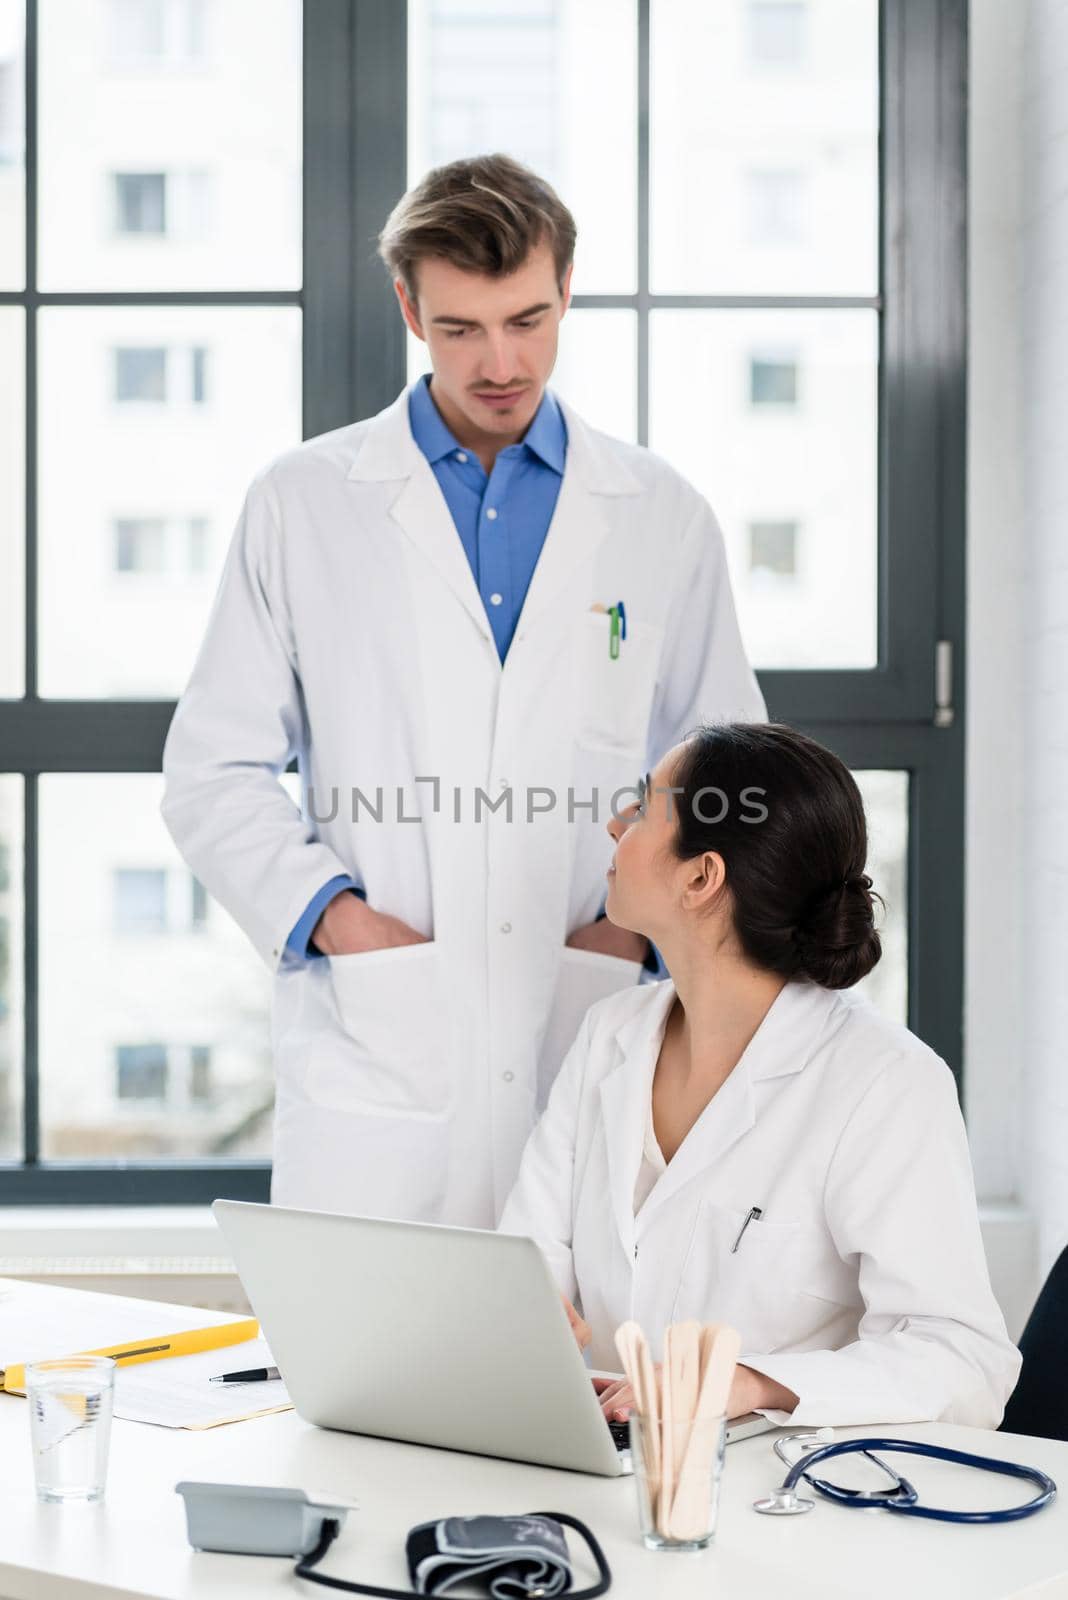 Experienced doctor and pharmacist checking together electronic information on a laptop in the office of a hospital with modern equipment